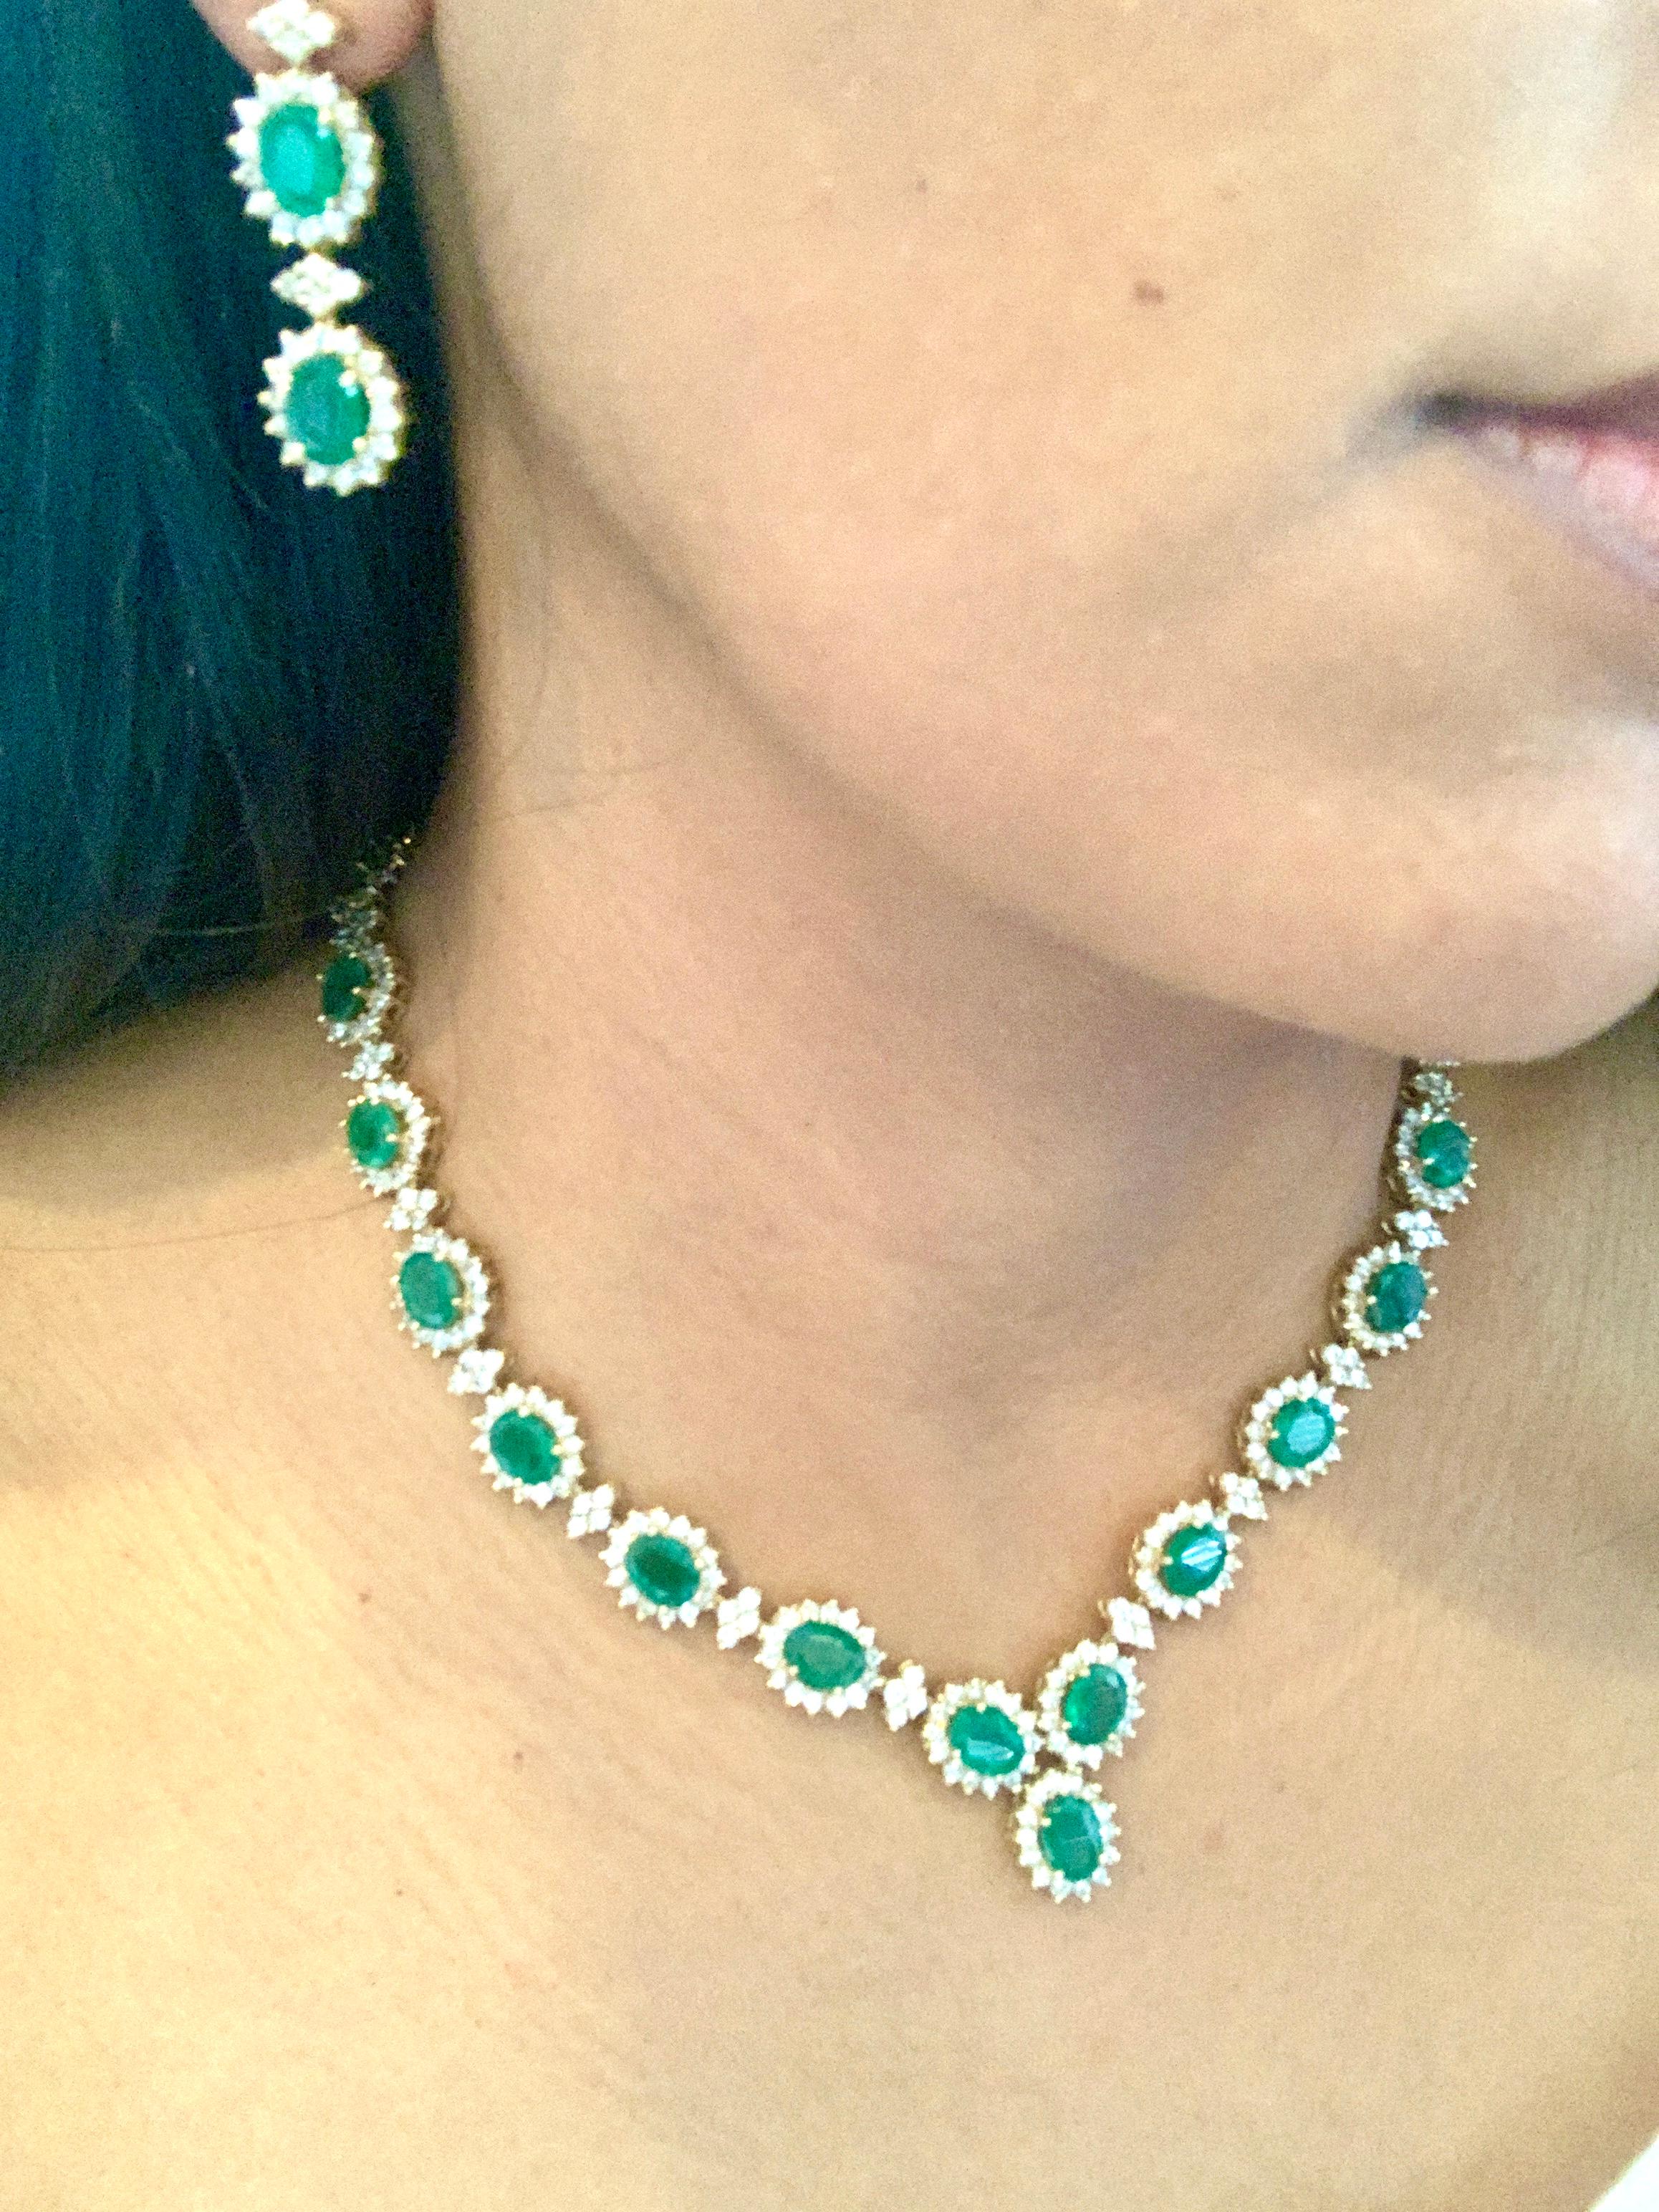 37 Ct Oval Shape Natural  Emerald & 22 Carat Diamond Necklace & Earring  Suite For Sale 10